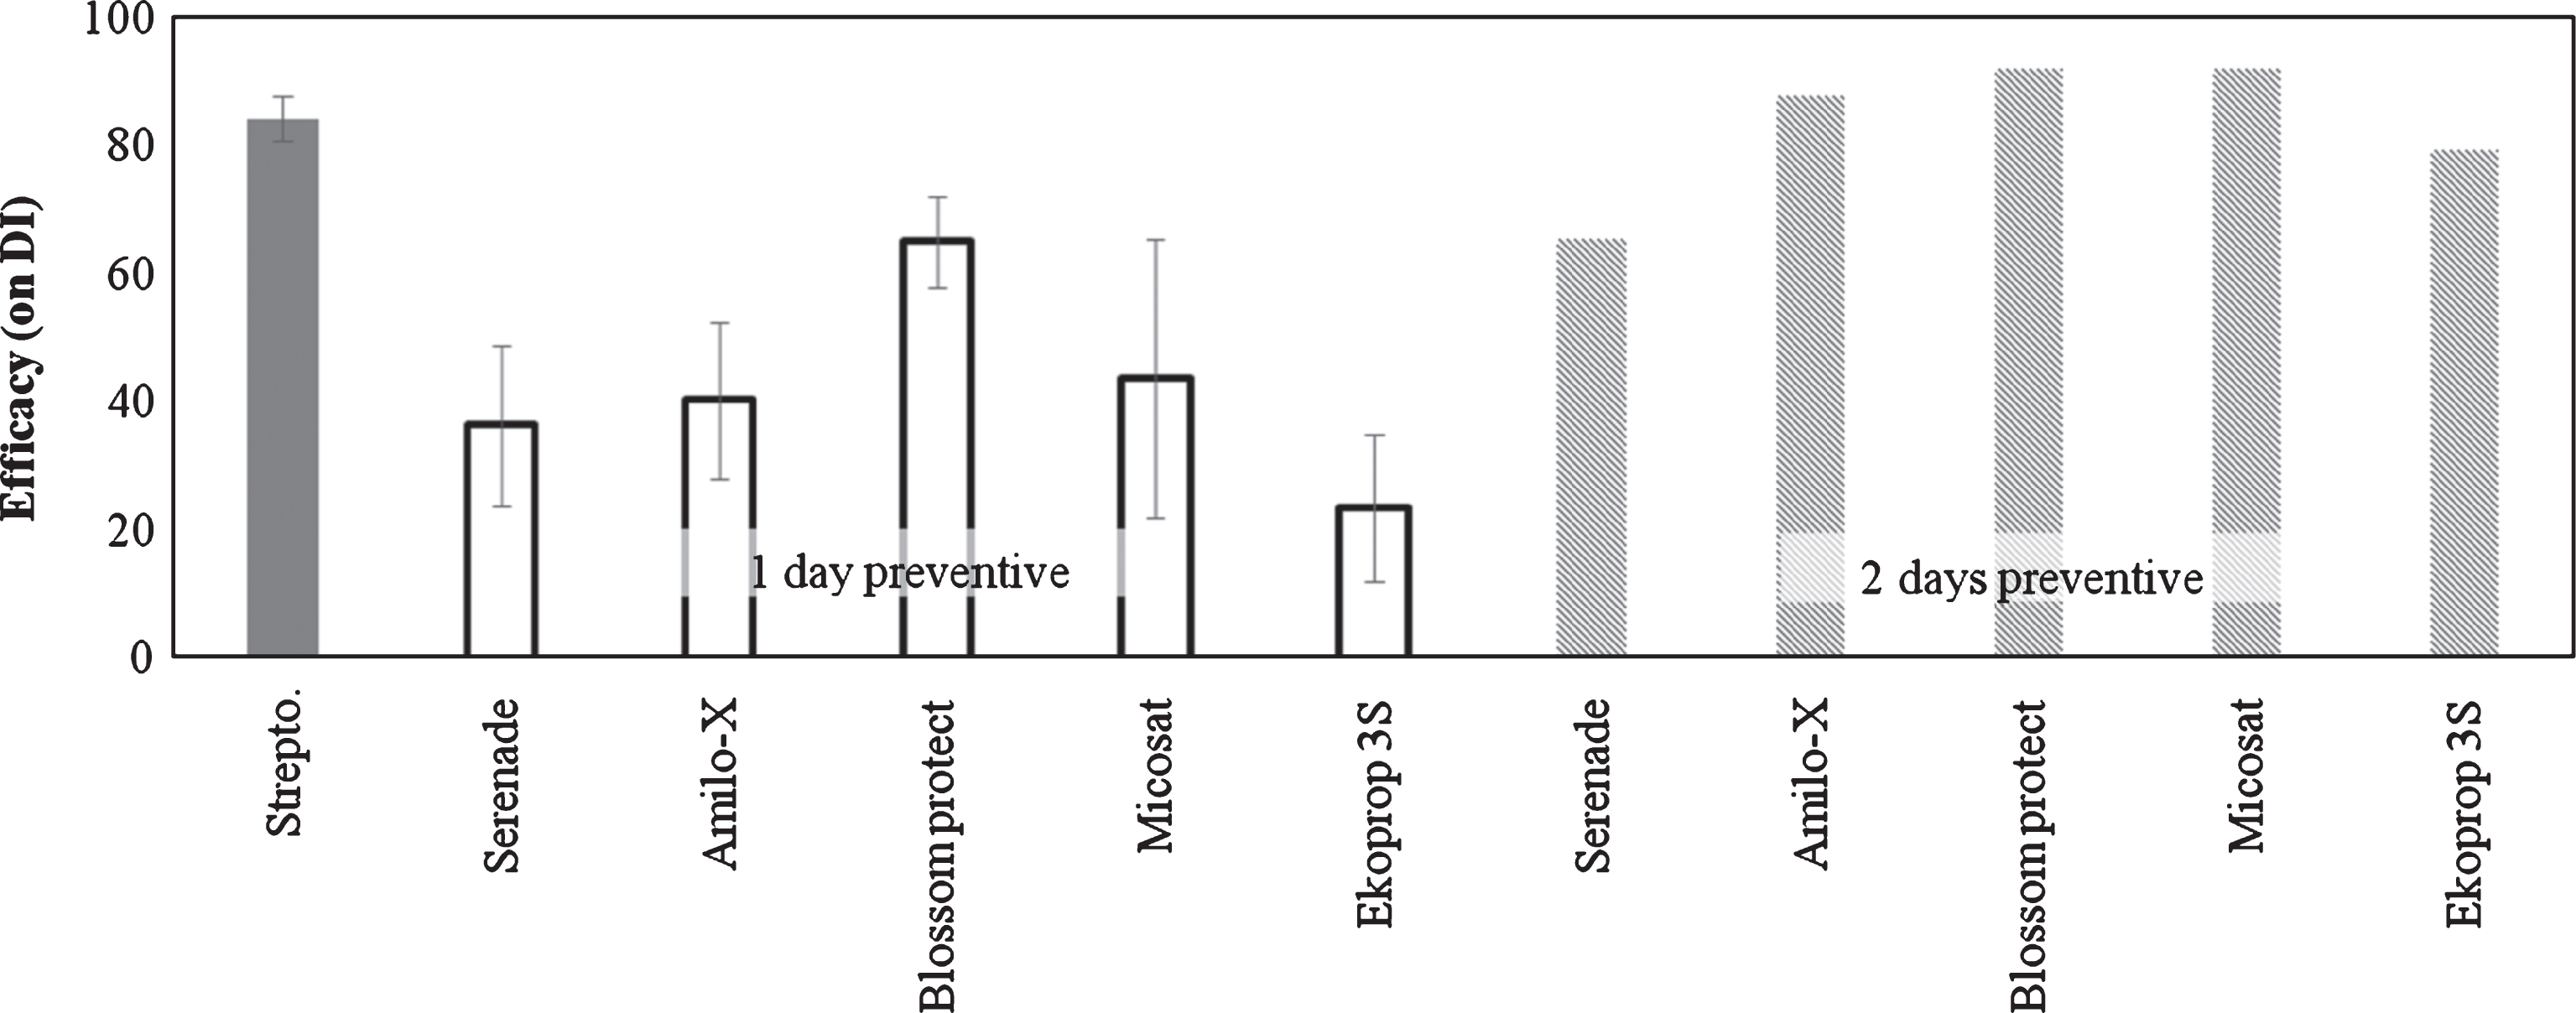 Efficacy of Biological Control Agents (BCAs) on bacterial canker development in Actinidia deliciosa. Spray treatments were performed 1 or 2 days before inoculation. Data refer 30 days after inoculation. Data are expressed as percentage of efficacy, calculated as the reduction of disease incidence and severity compared to untreated control. The average of all the independently performed experiments±standard error (S.E.) is shown.